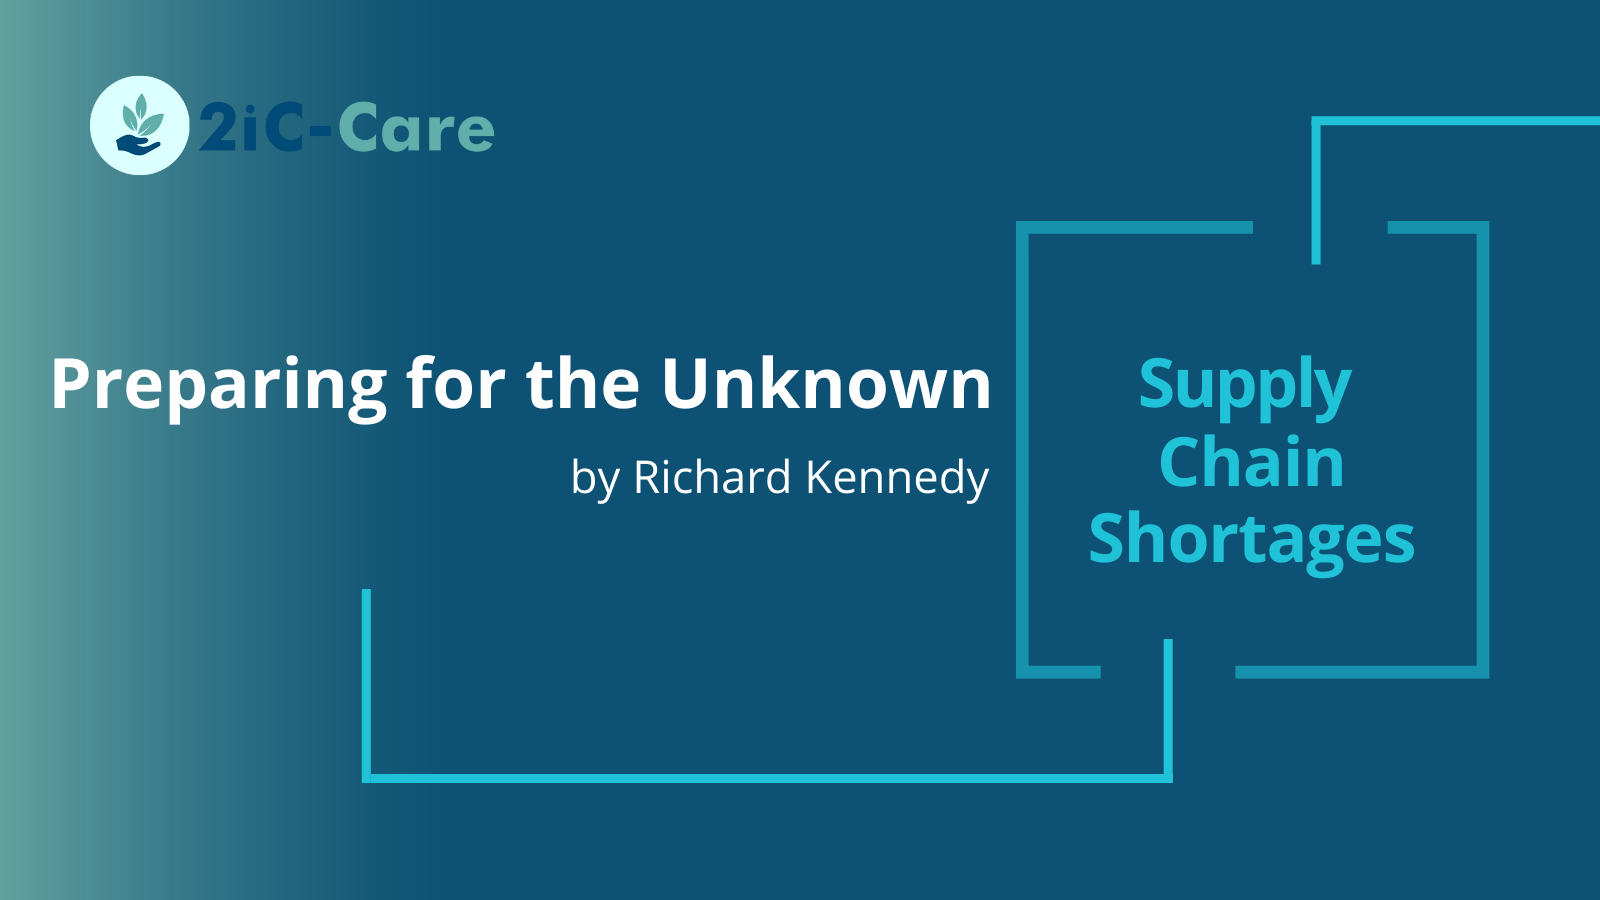 Preparing for the unknown; navigating supply chain shortages